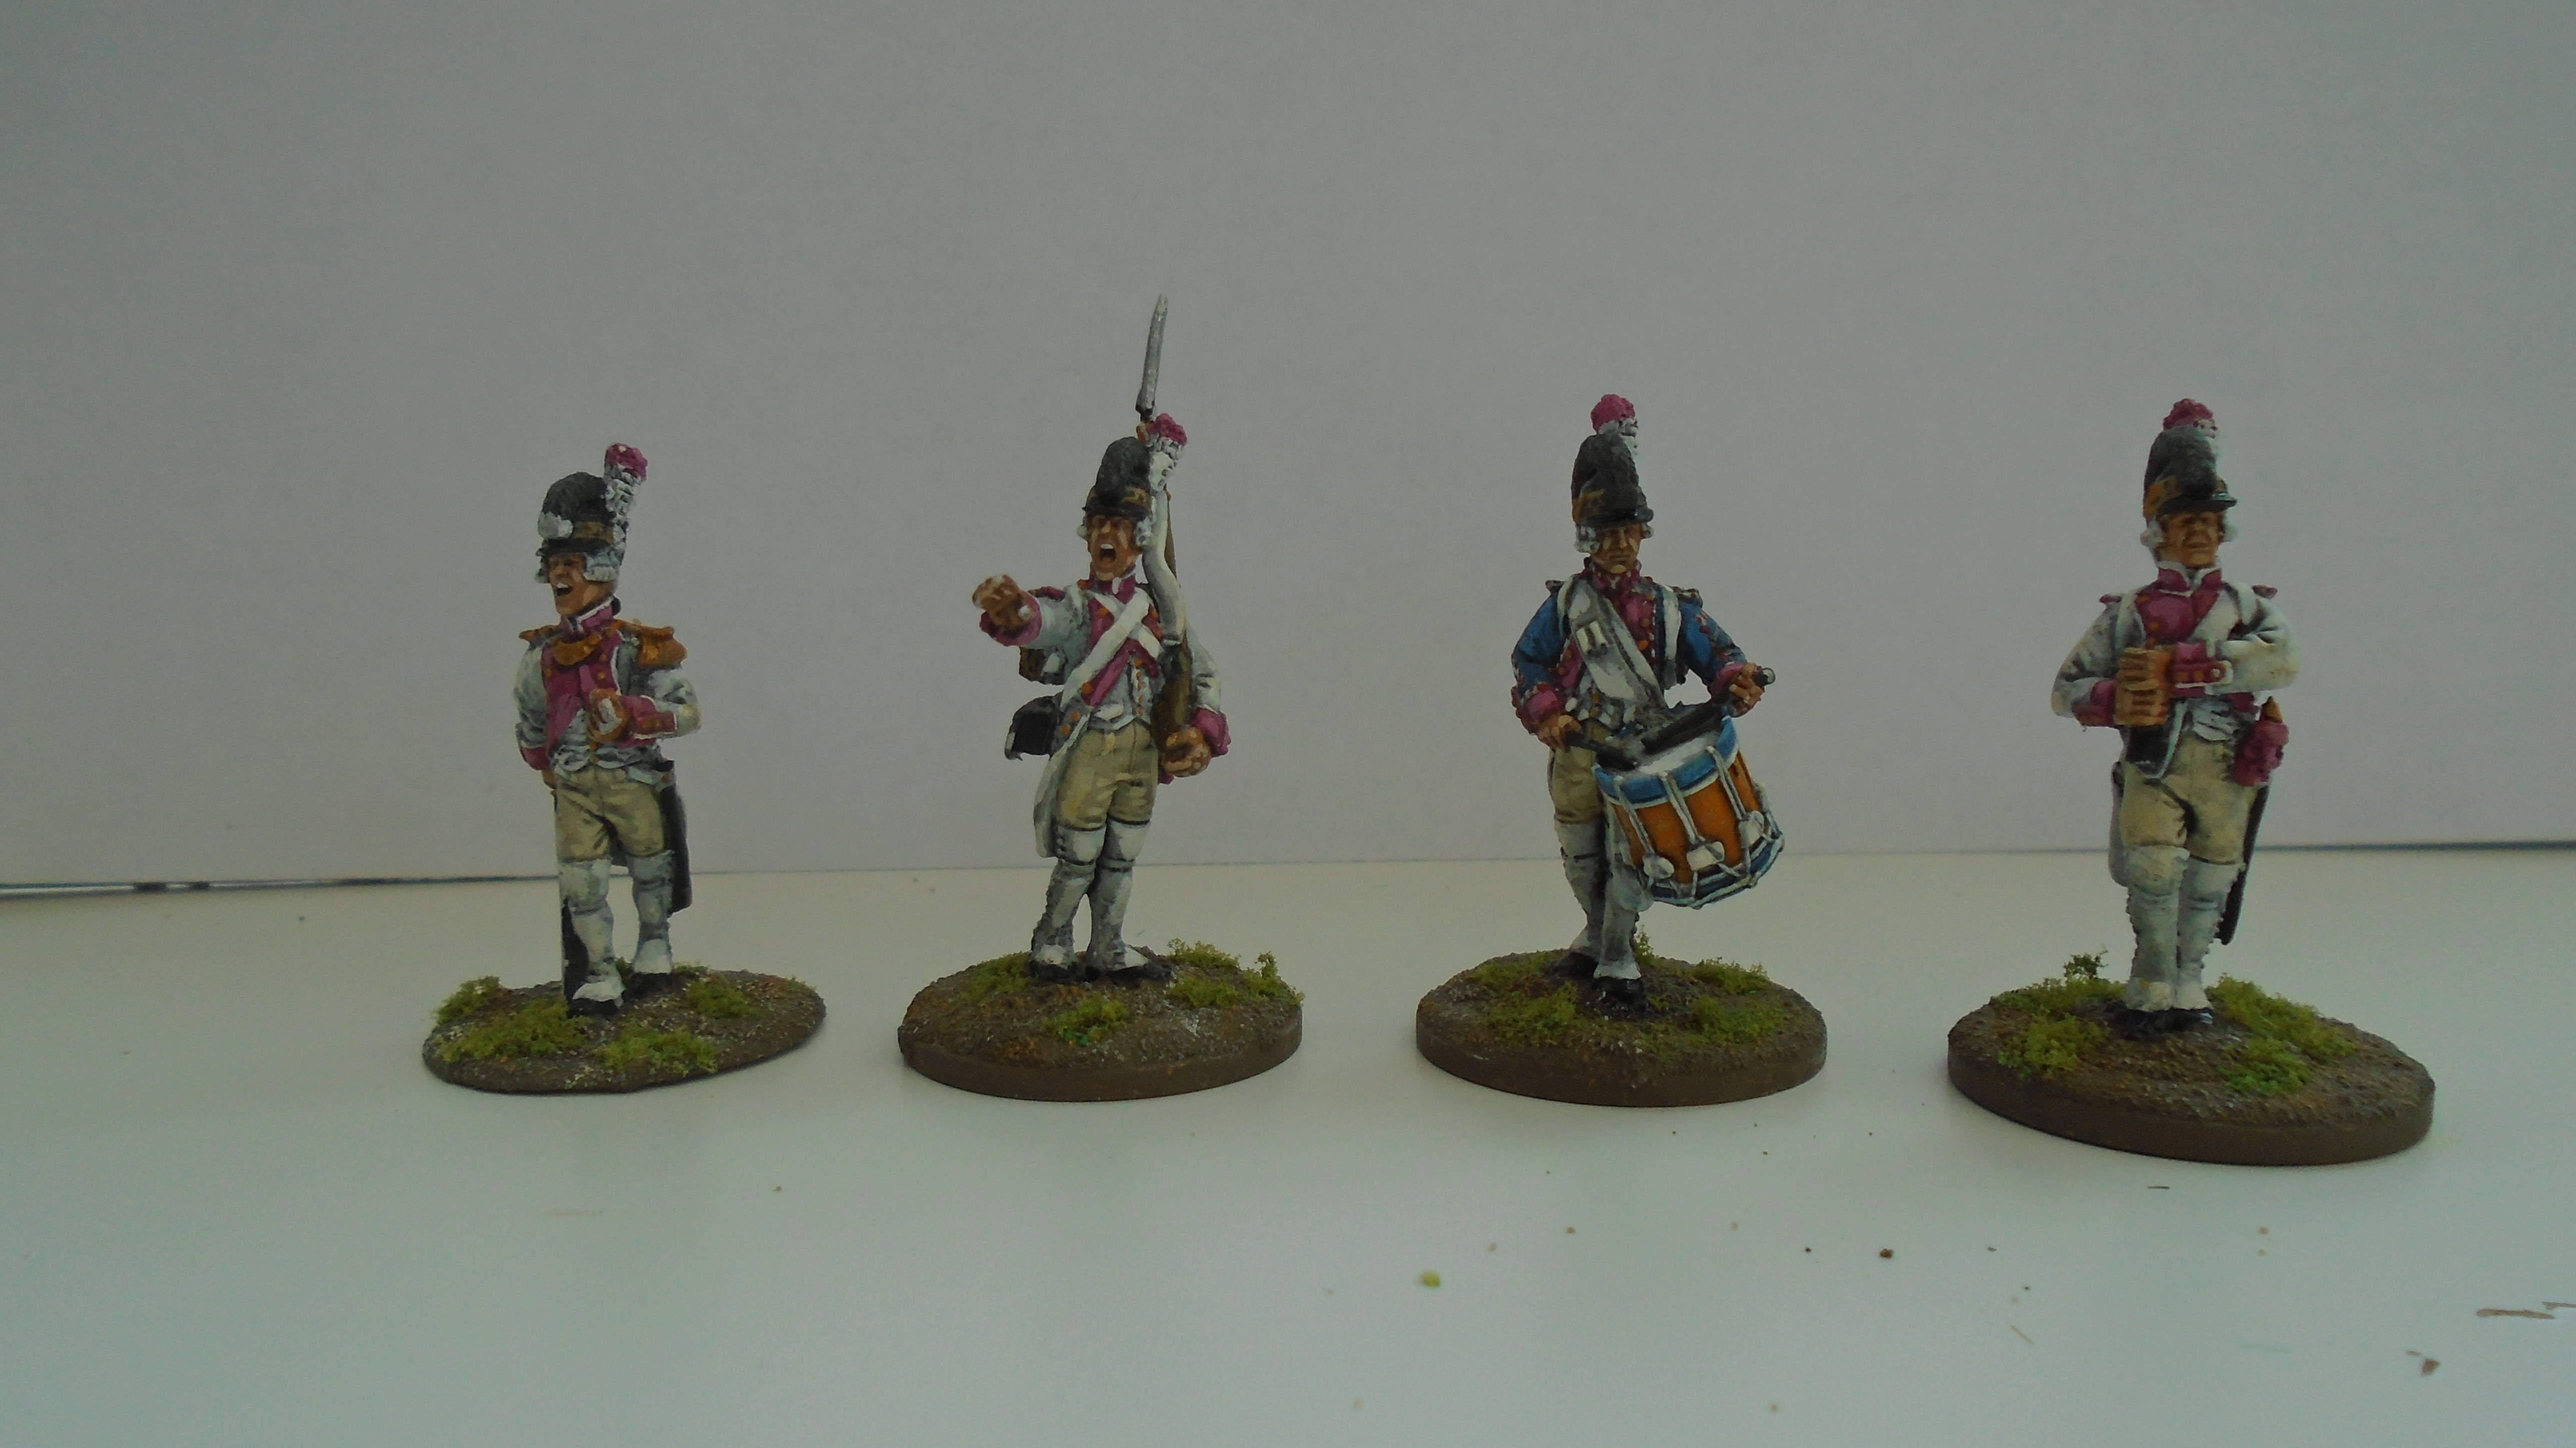 Firing line Soldiers of the Ancien Regime unit